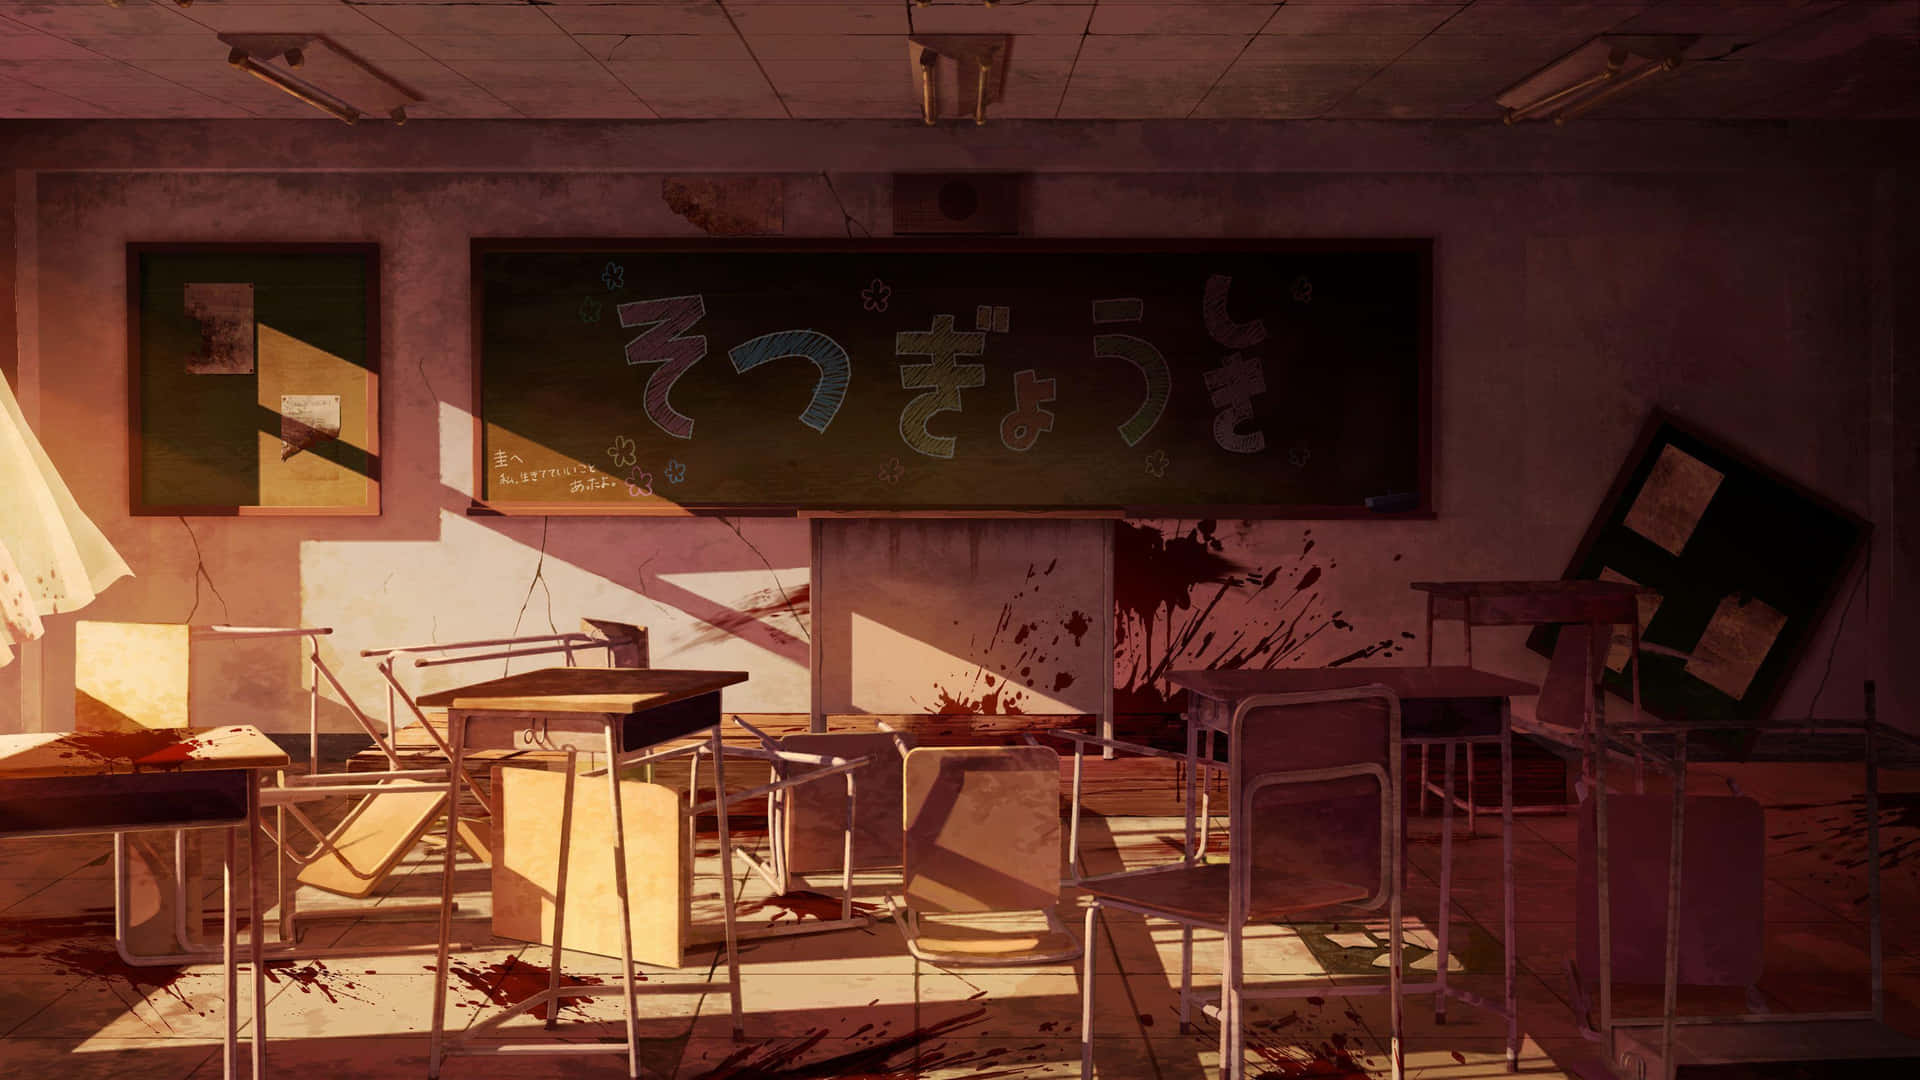 Inside the anime classroom, students explore the limits of their imaginations.